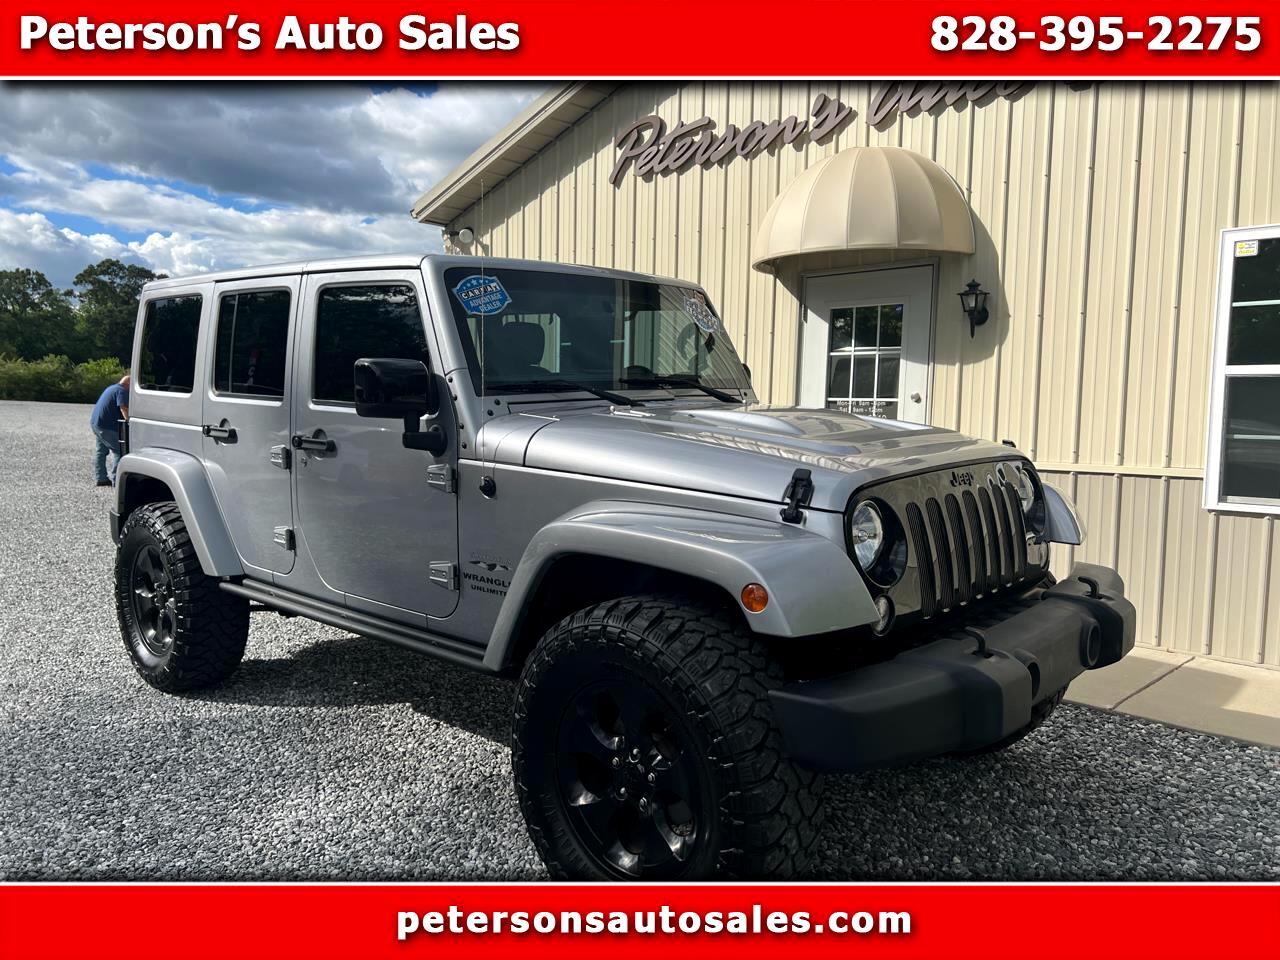 Used 2015 Jeep Wrangler Unlimited Sahara 4WD for Sale in Forest City NC  28043 Peterson's Auto Sales